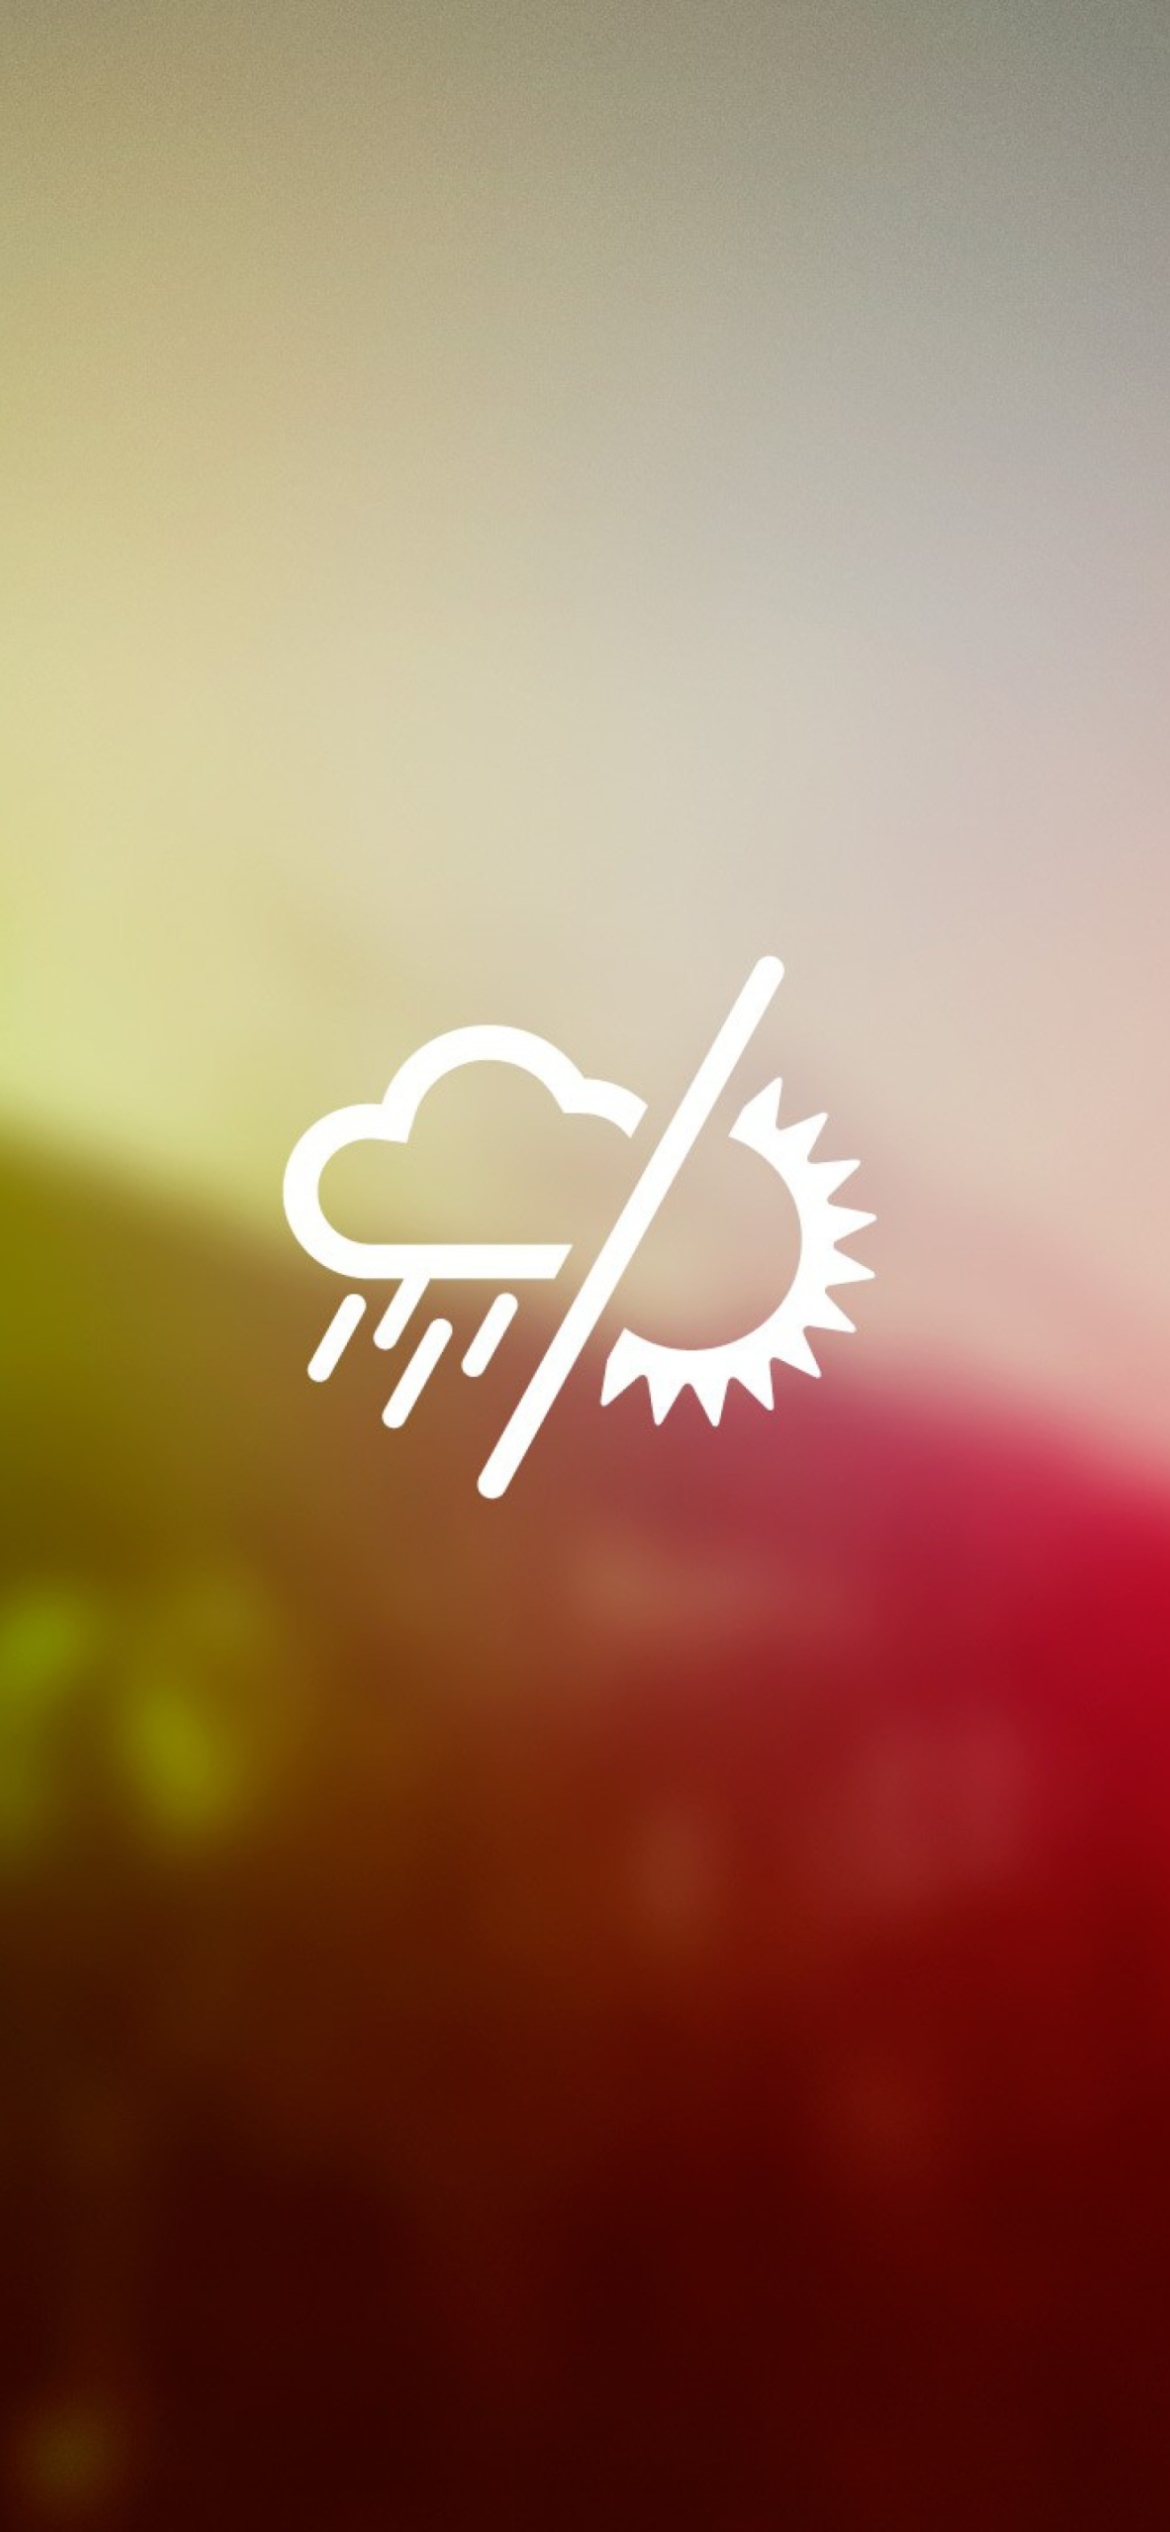 Rainy Or Sunny Weather wallpaper 1170x2532